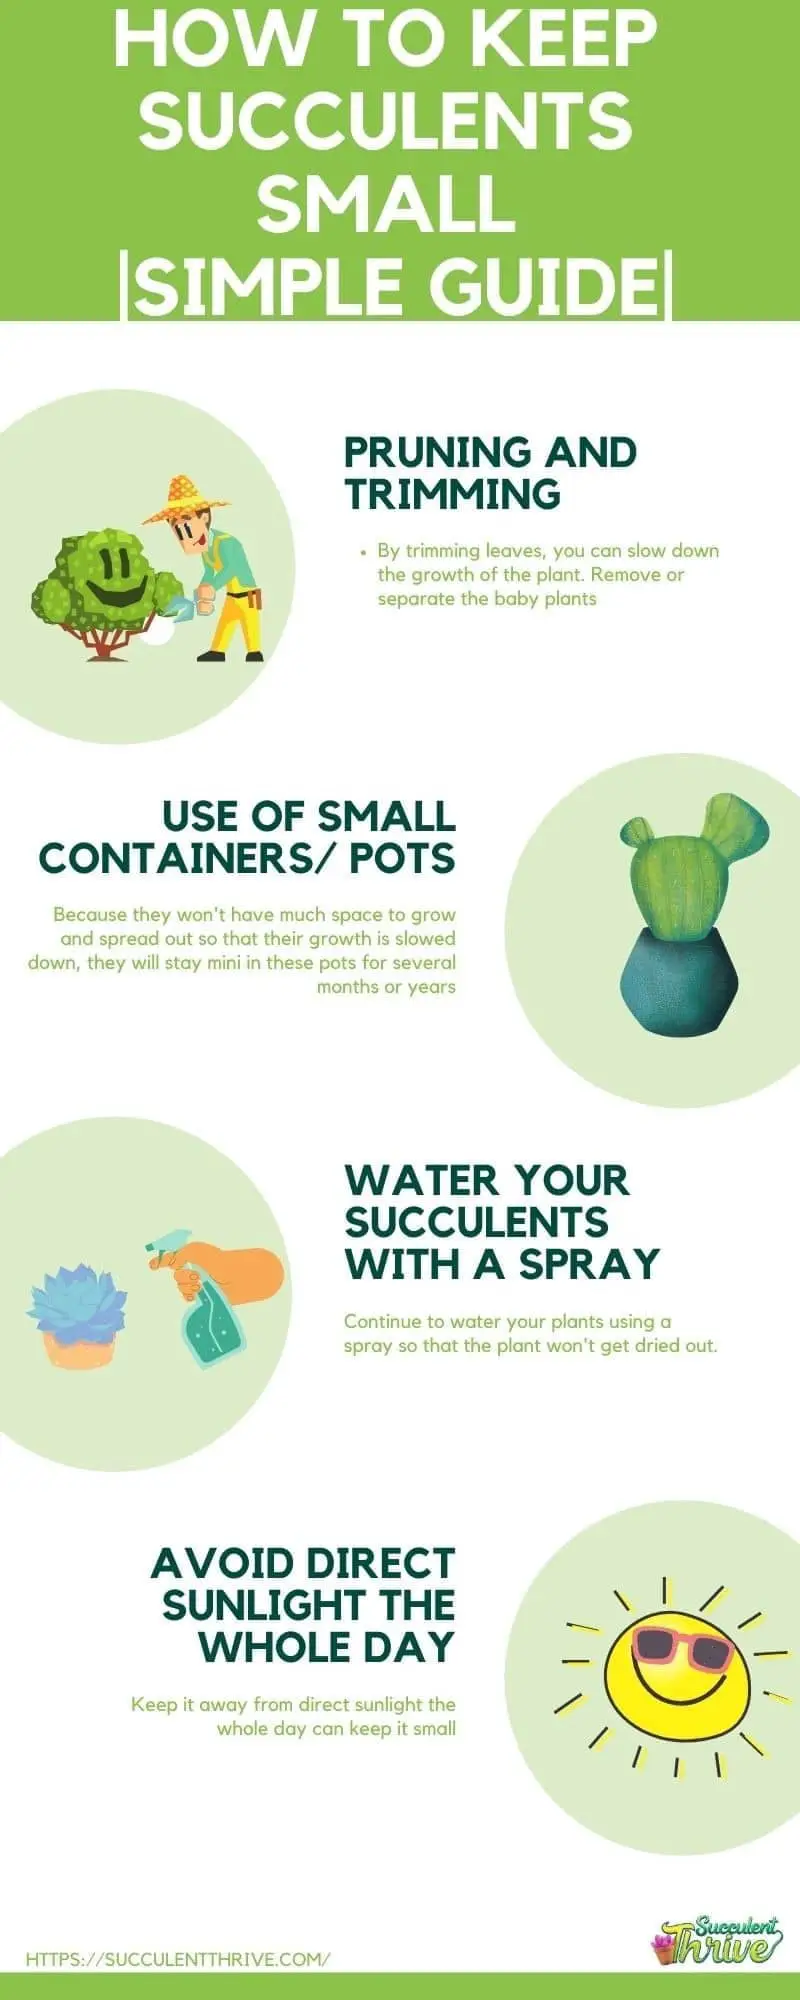 _How to Keep Succulents Small and manageable_ Simple Guide infographic